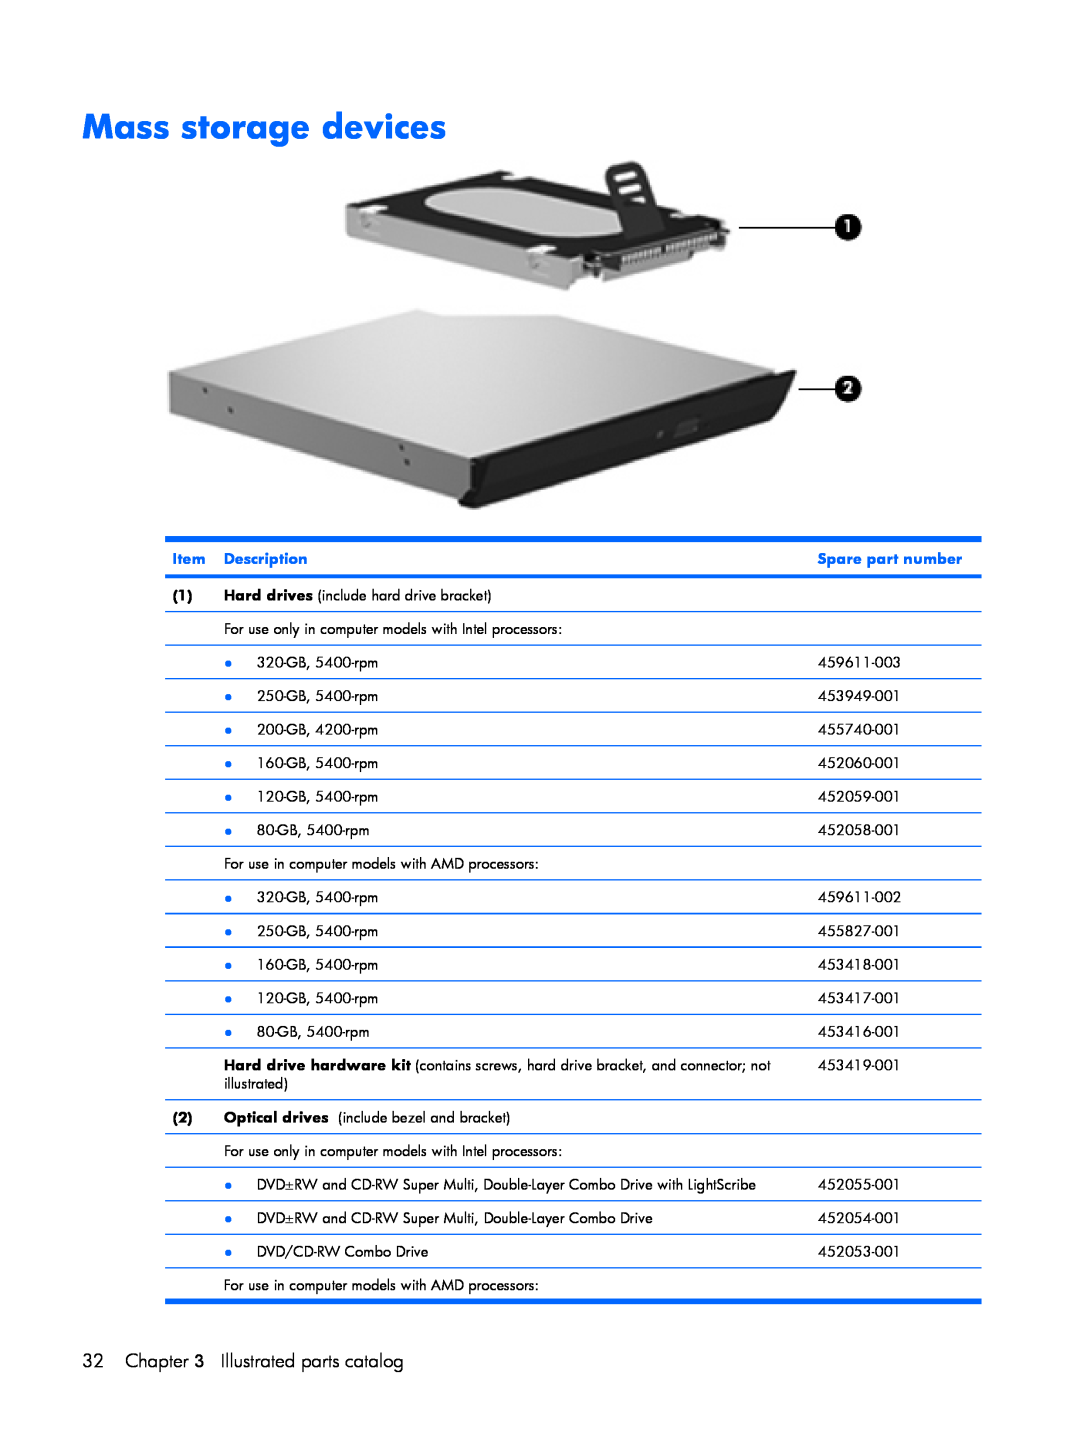 HP V3804TX, V3523TU, V3930TU, V3931TU, V3929TU, V3928TU, V3925TU, V3923TU, V3700 Mass storage devices, Illustrated parts catalog 